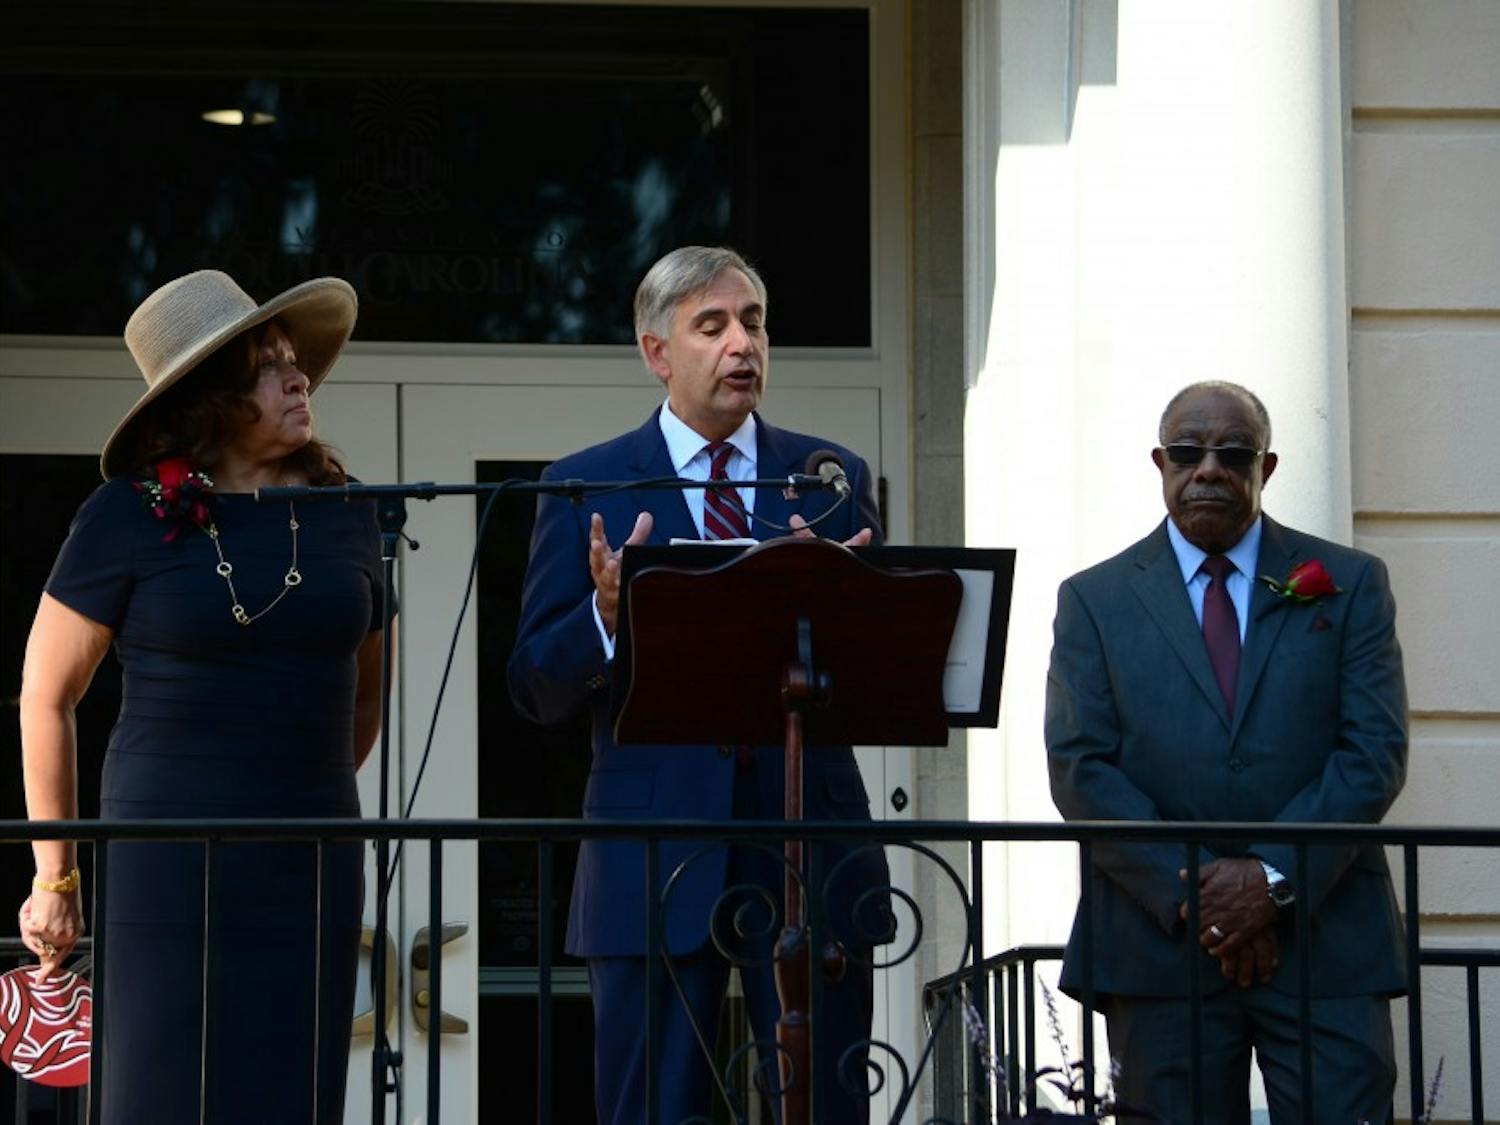 	University President Harris Pastides addresses a large crowd gathered in front of the iconic location at the Osborne Administration Building where Henrie Monteith Treadwell, James Solomon Jr. and Robert Anderson first enrolled at the university.